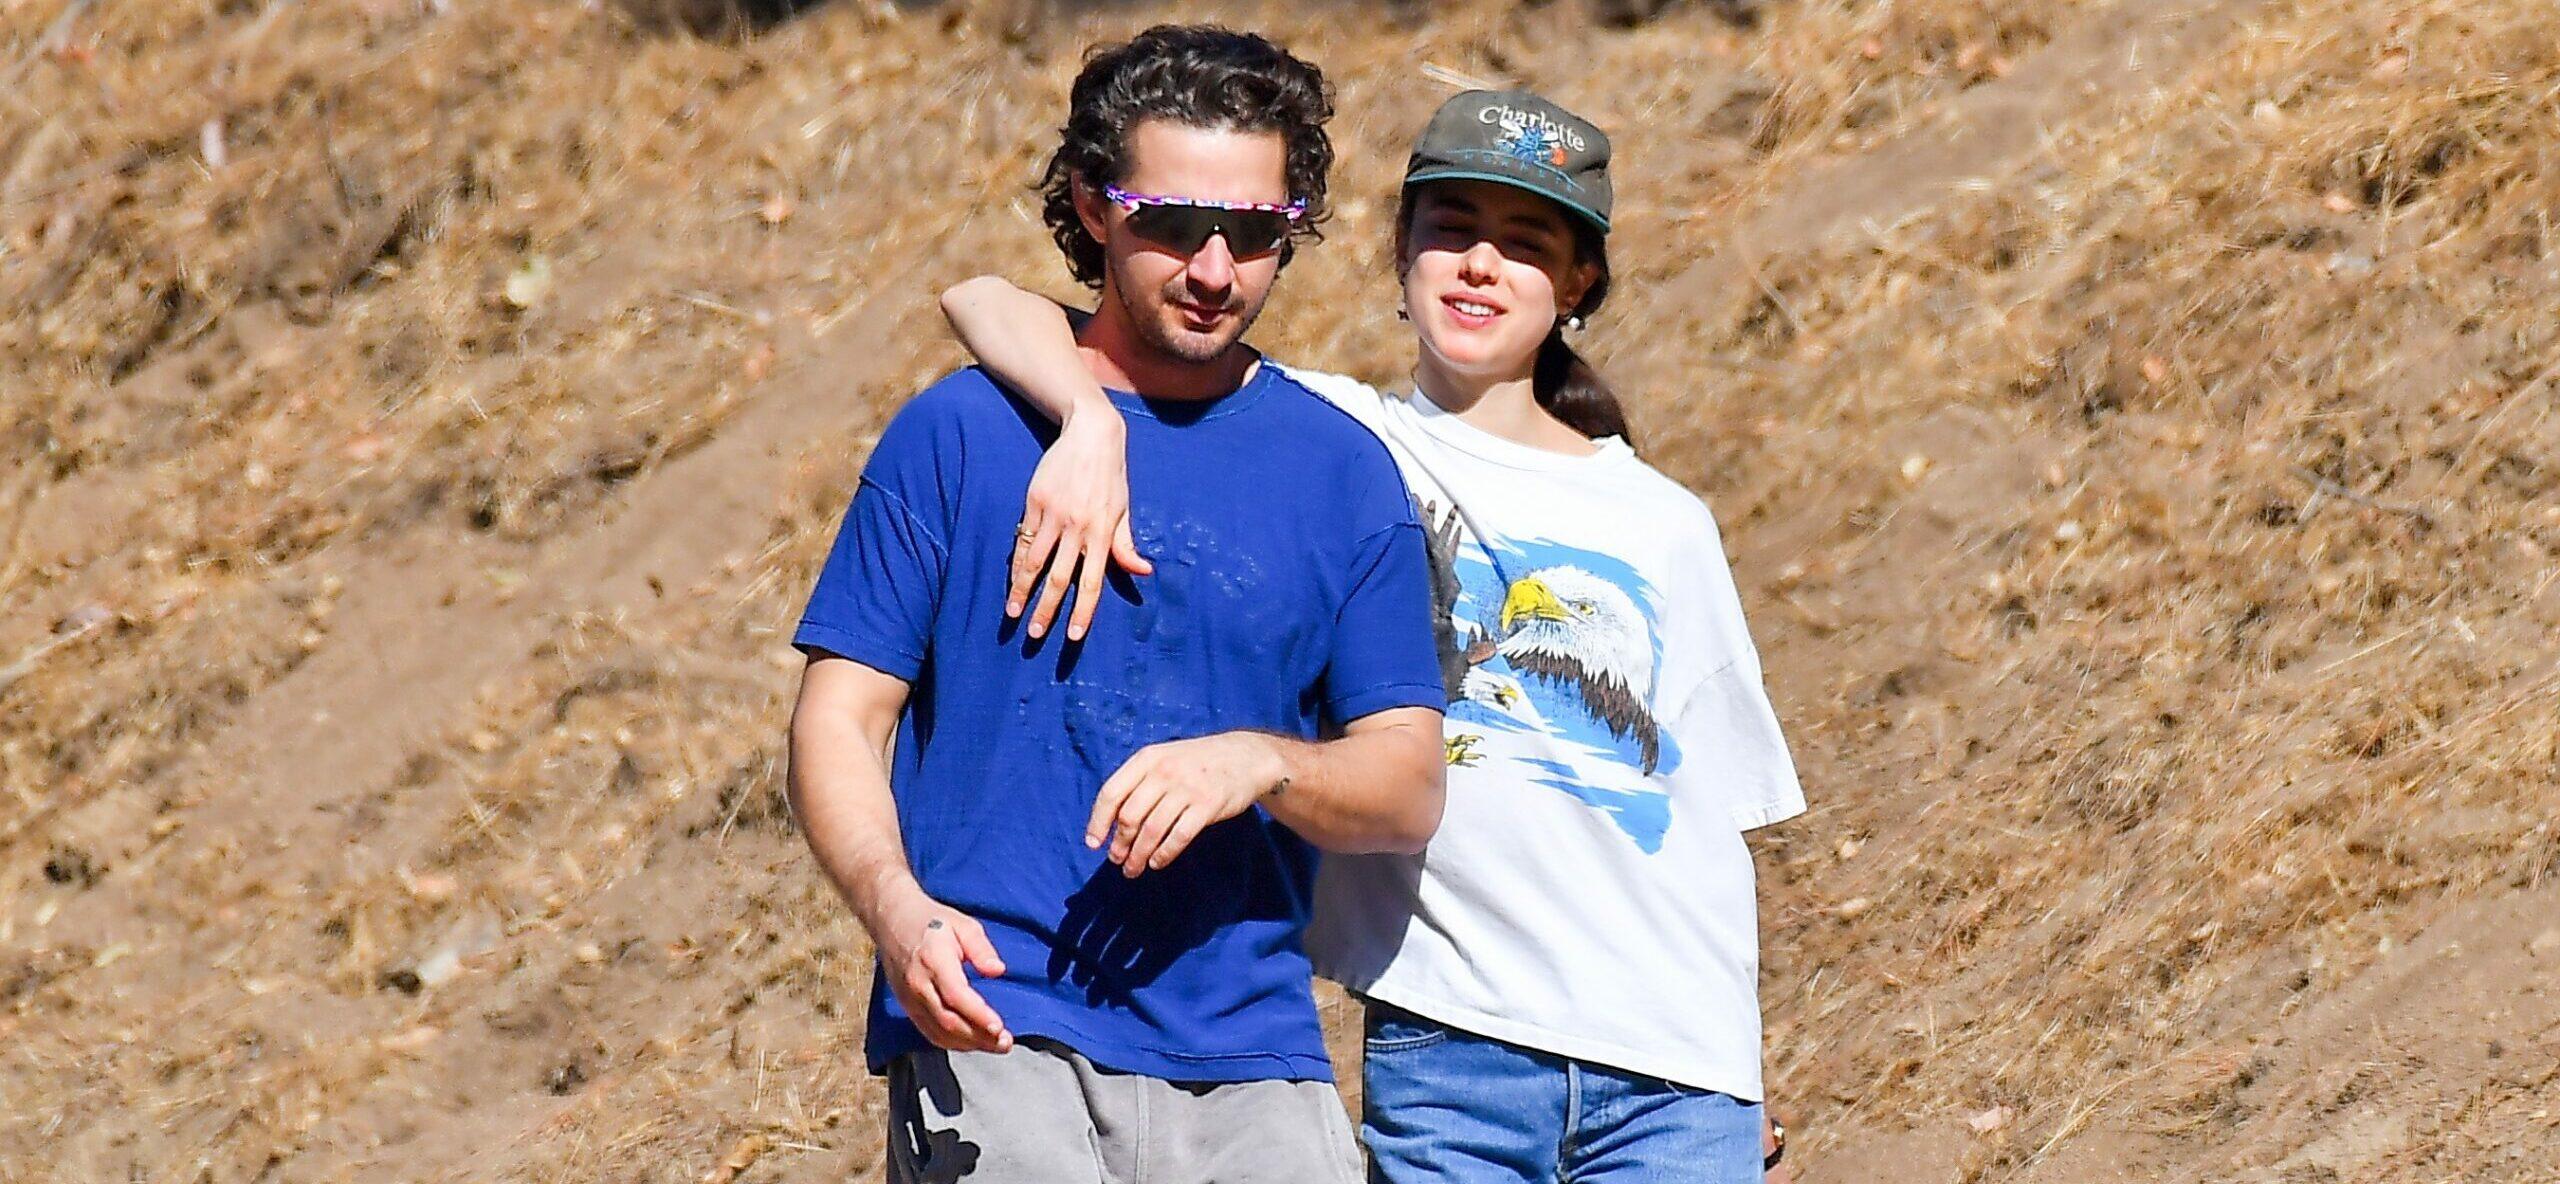 Shia LaBeouf heads out on a shirtless hike with his girlfriend Margaret Qualley in Los Angeles